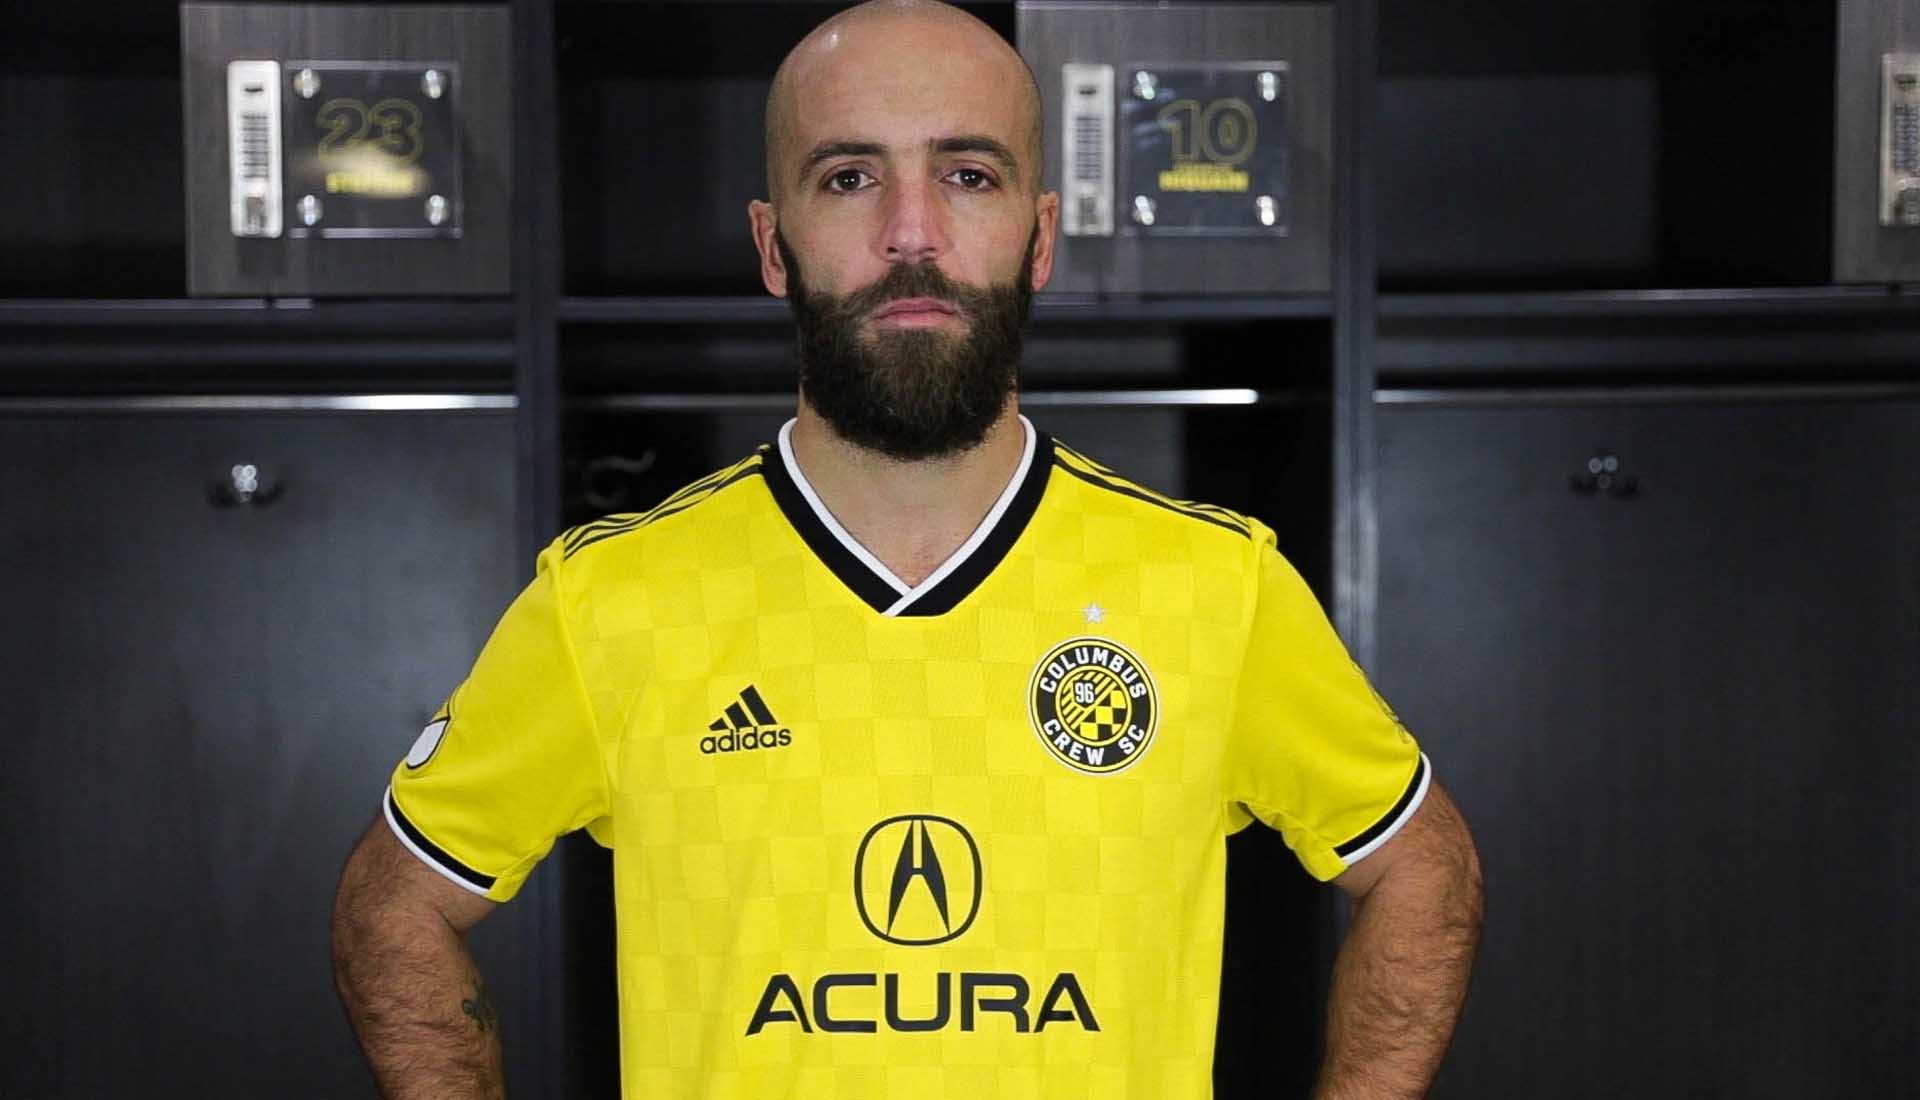 adidas Launch The MLS All Star 2019 Jersey - SoccerBible